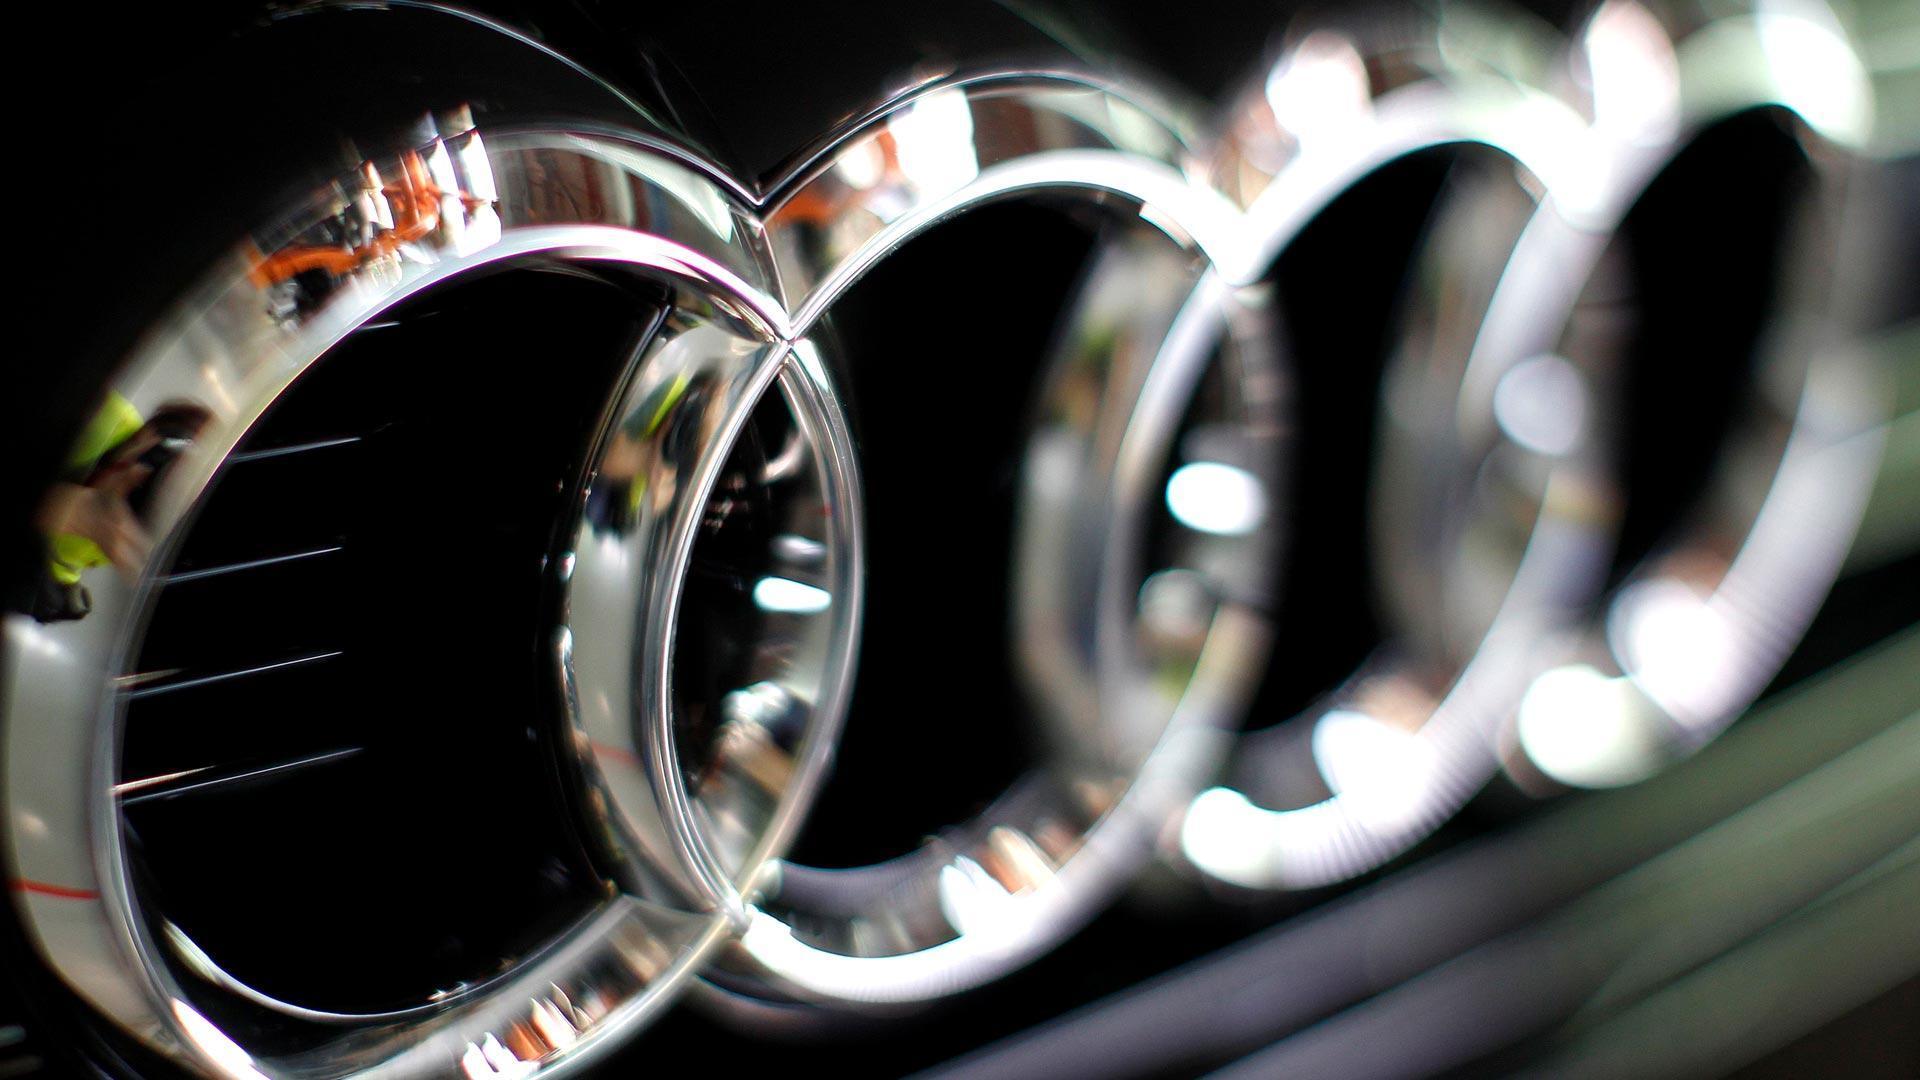 Audi Logo Wallpaper Photo. All About Gallery Car